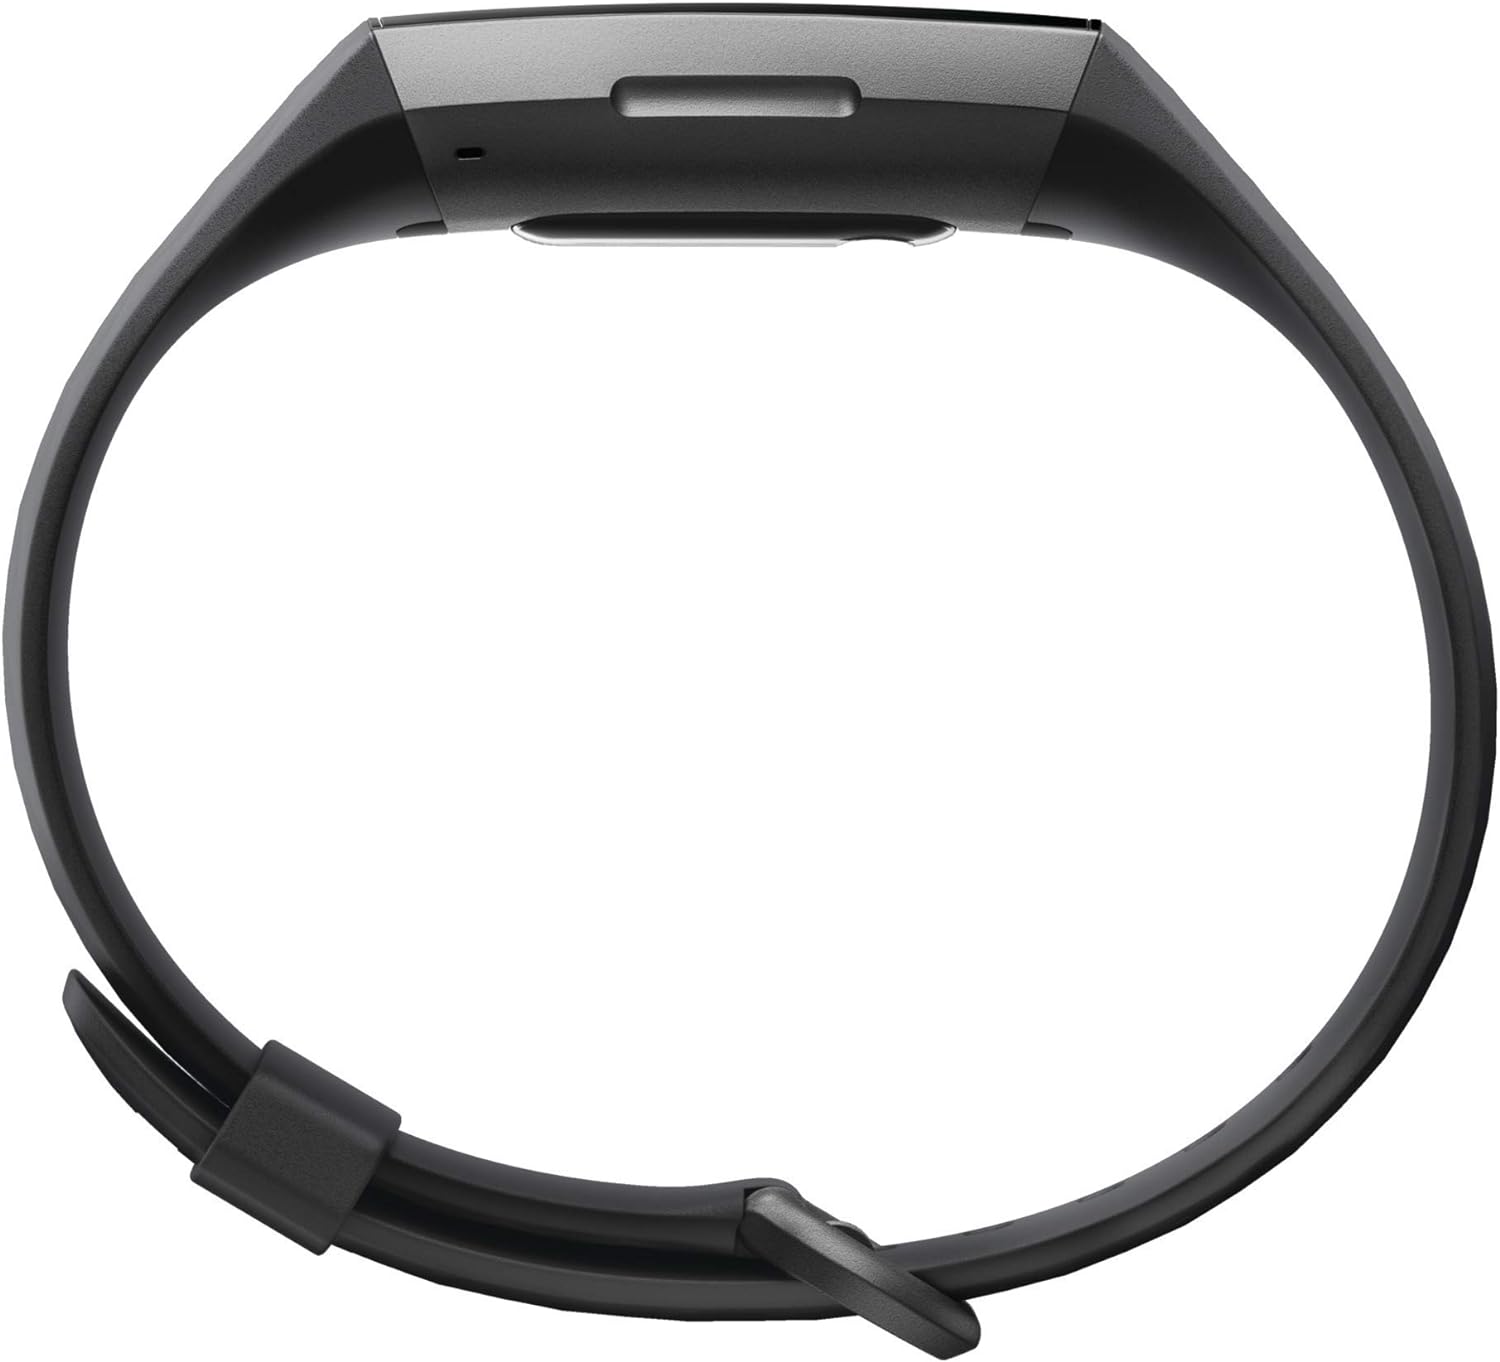 Fitbit Charge 3 Activity Tracker + Heart Rate - Black (Refurbished)